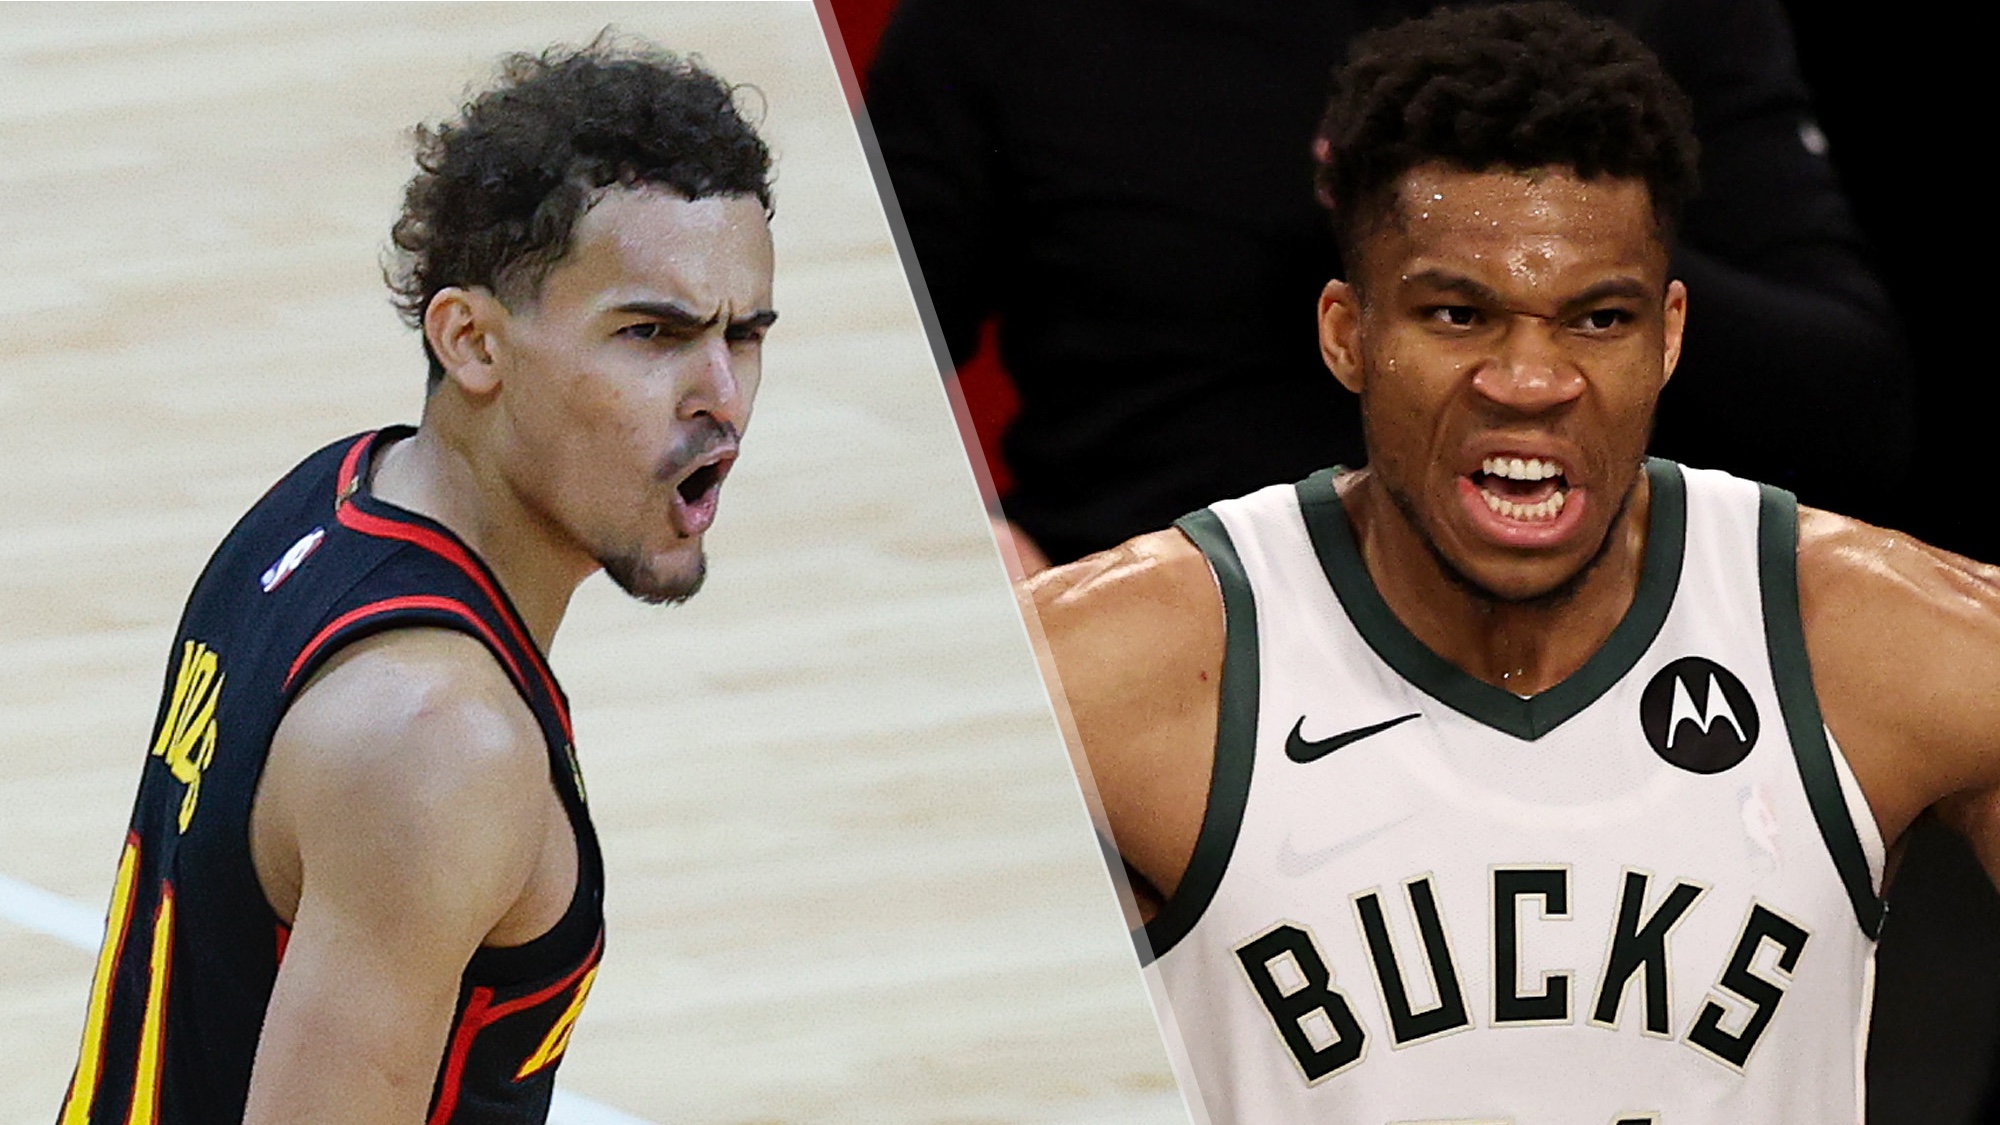 Hawks Vs Bucks Live Stream How To Watch The Nba Playoffs Game 1 Online Tom S Guide